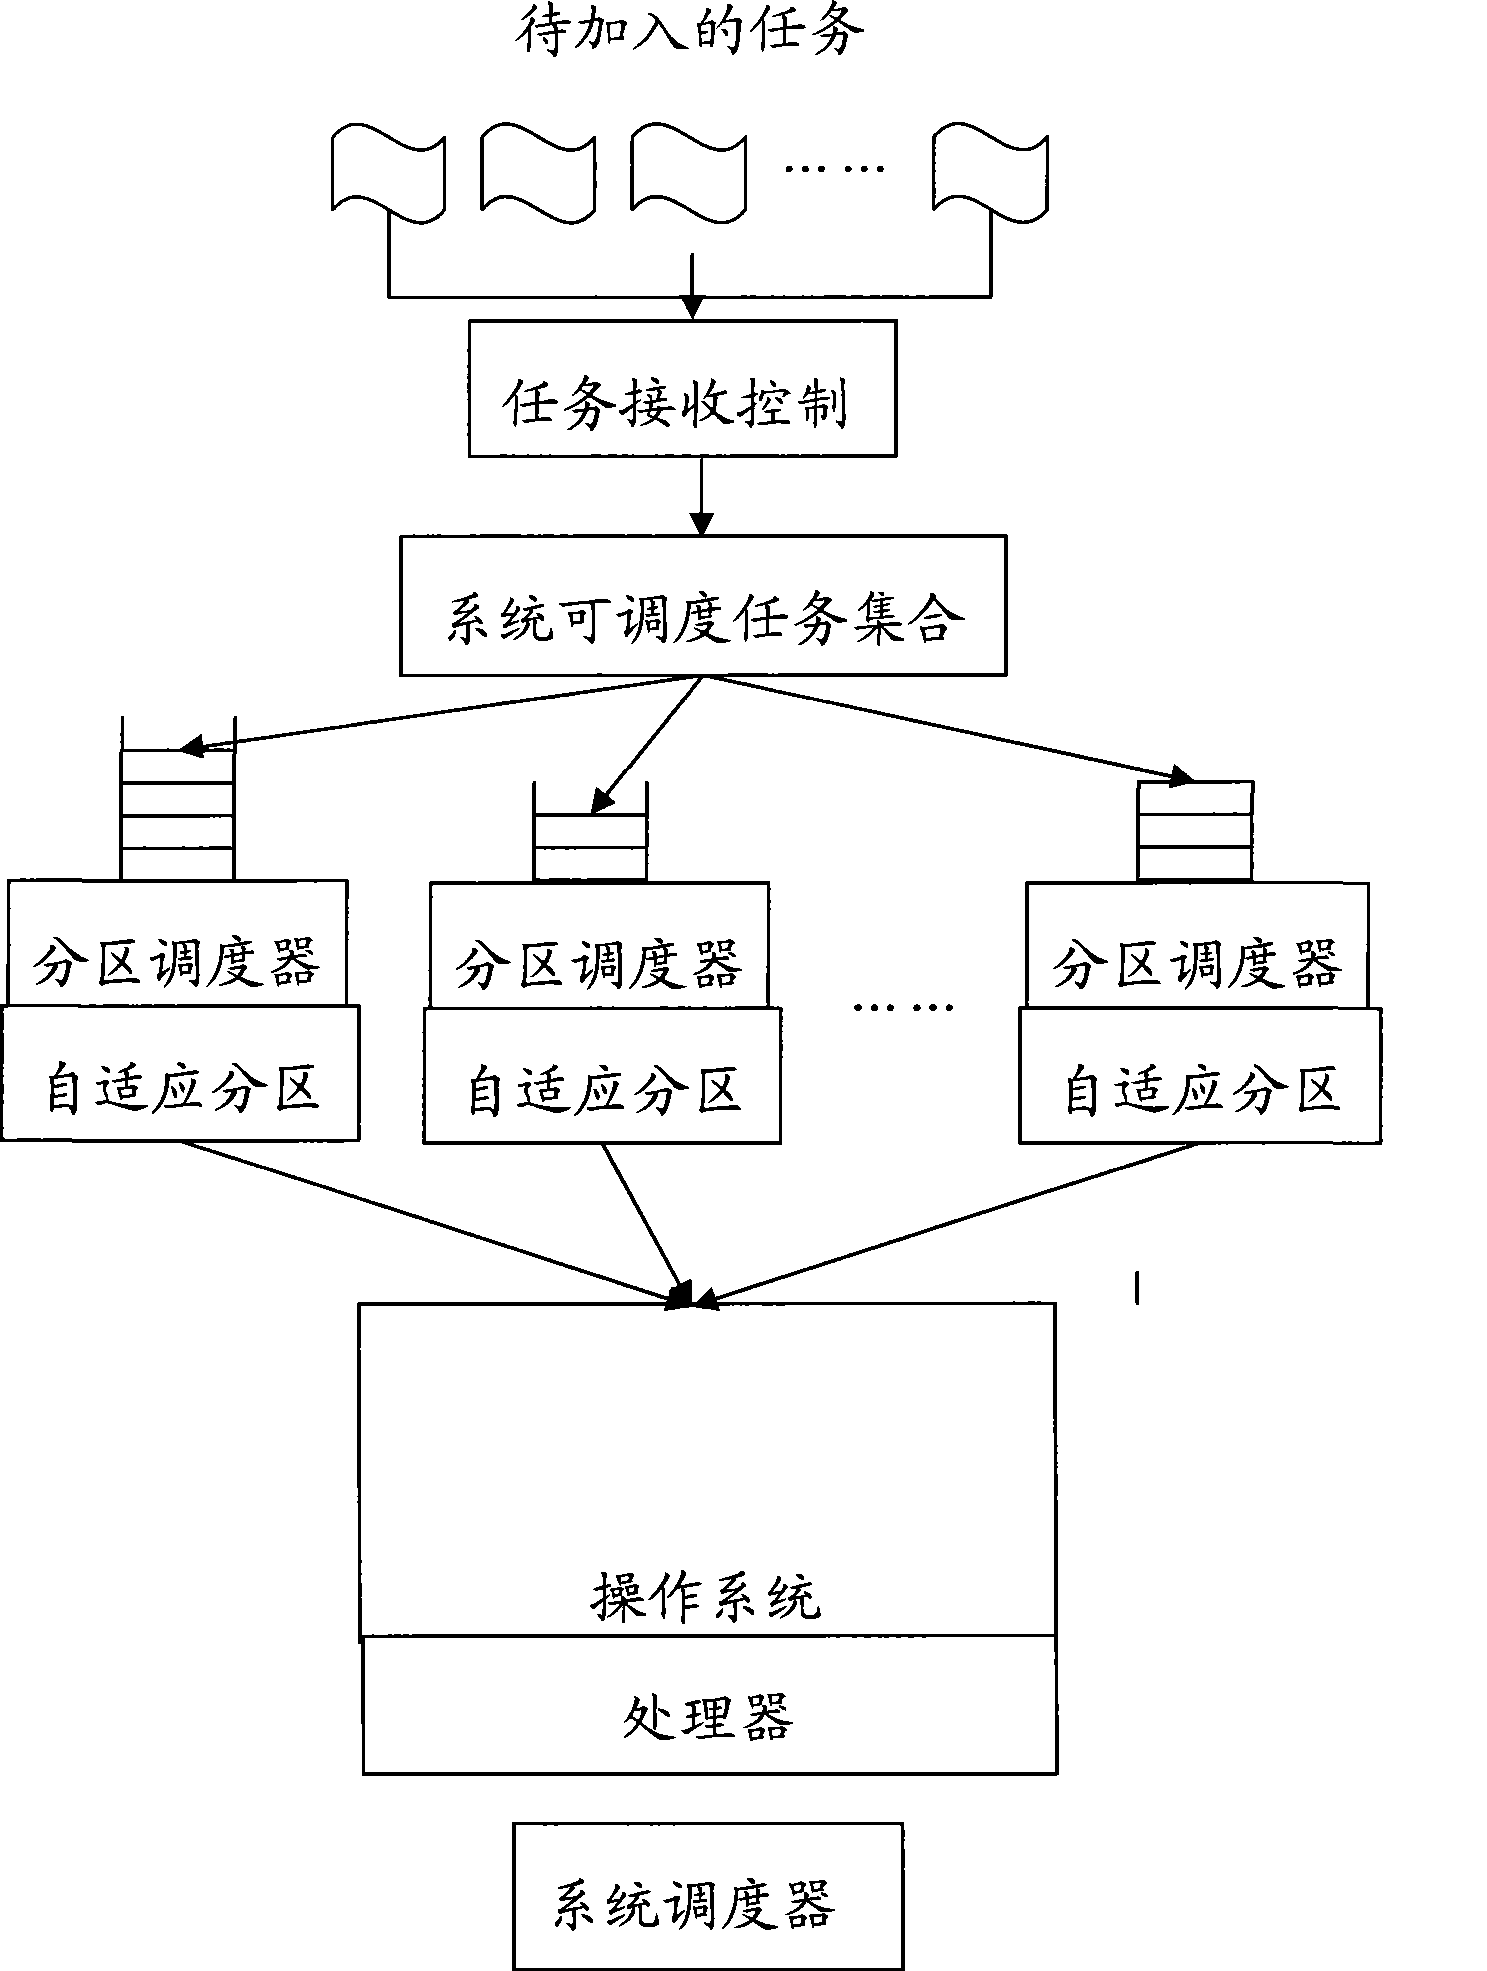 Task scheduling apparatus and method for embedded operating system